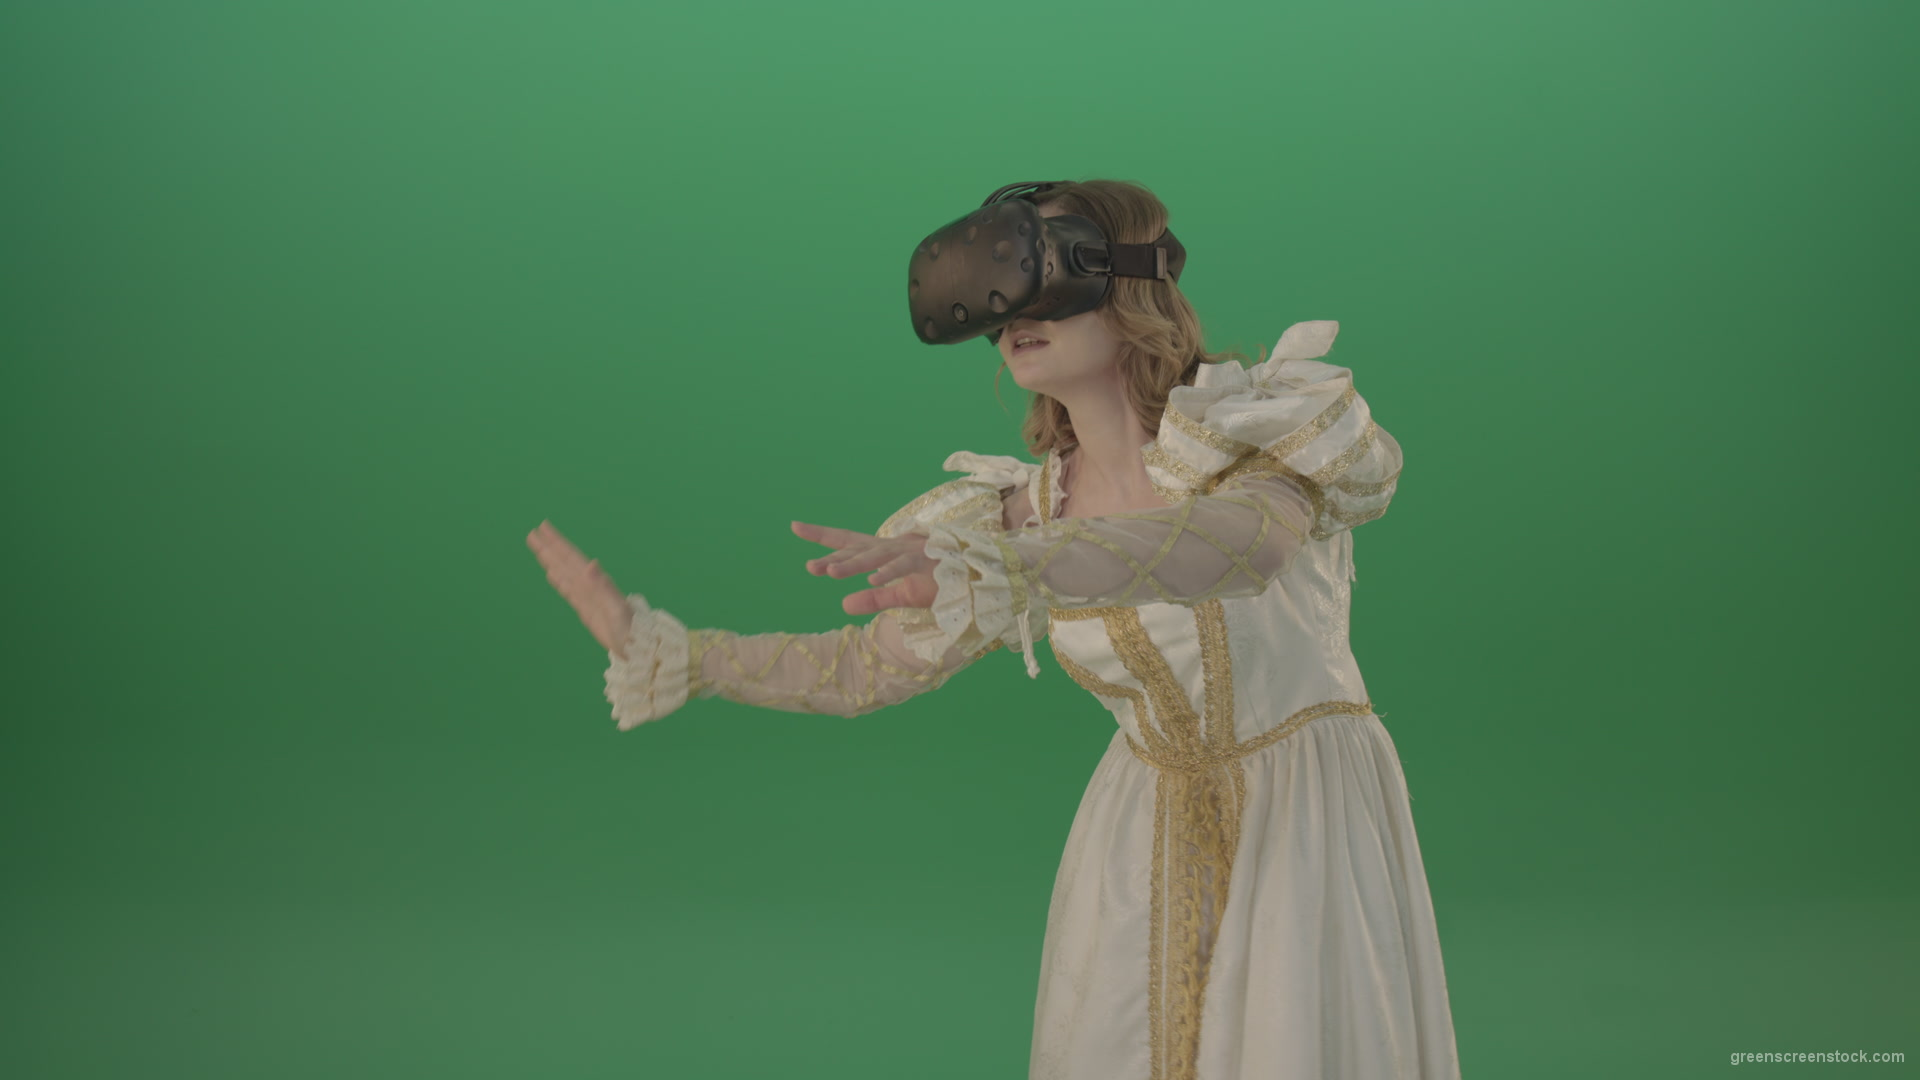 3d-glasses-of-virtual-reality-the-girl-looked-into-the-virtual-world-isolated-on-green-screen_001 Green Screen Stock